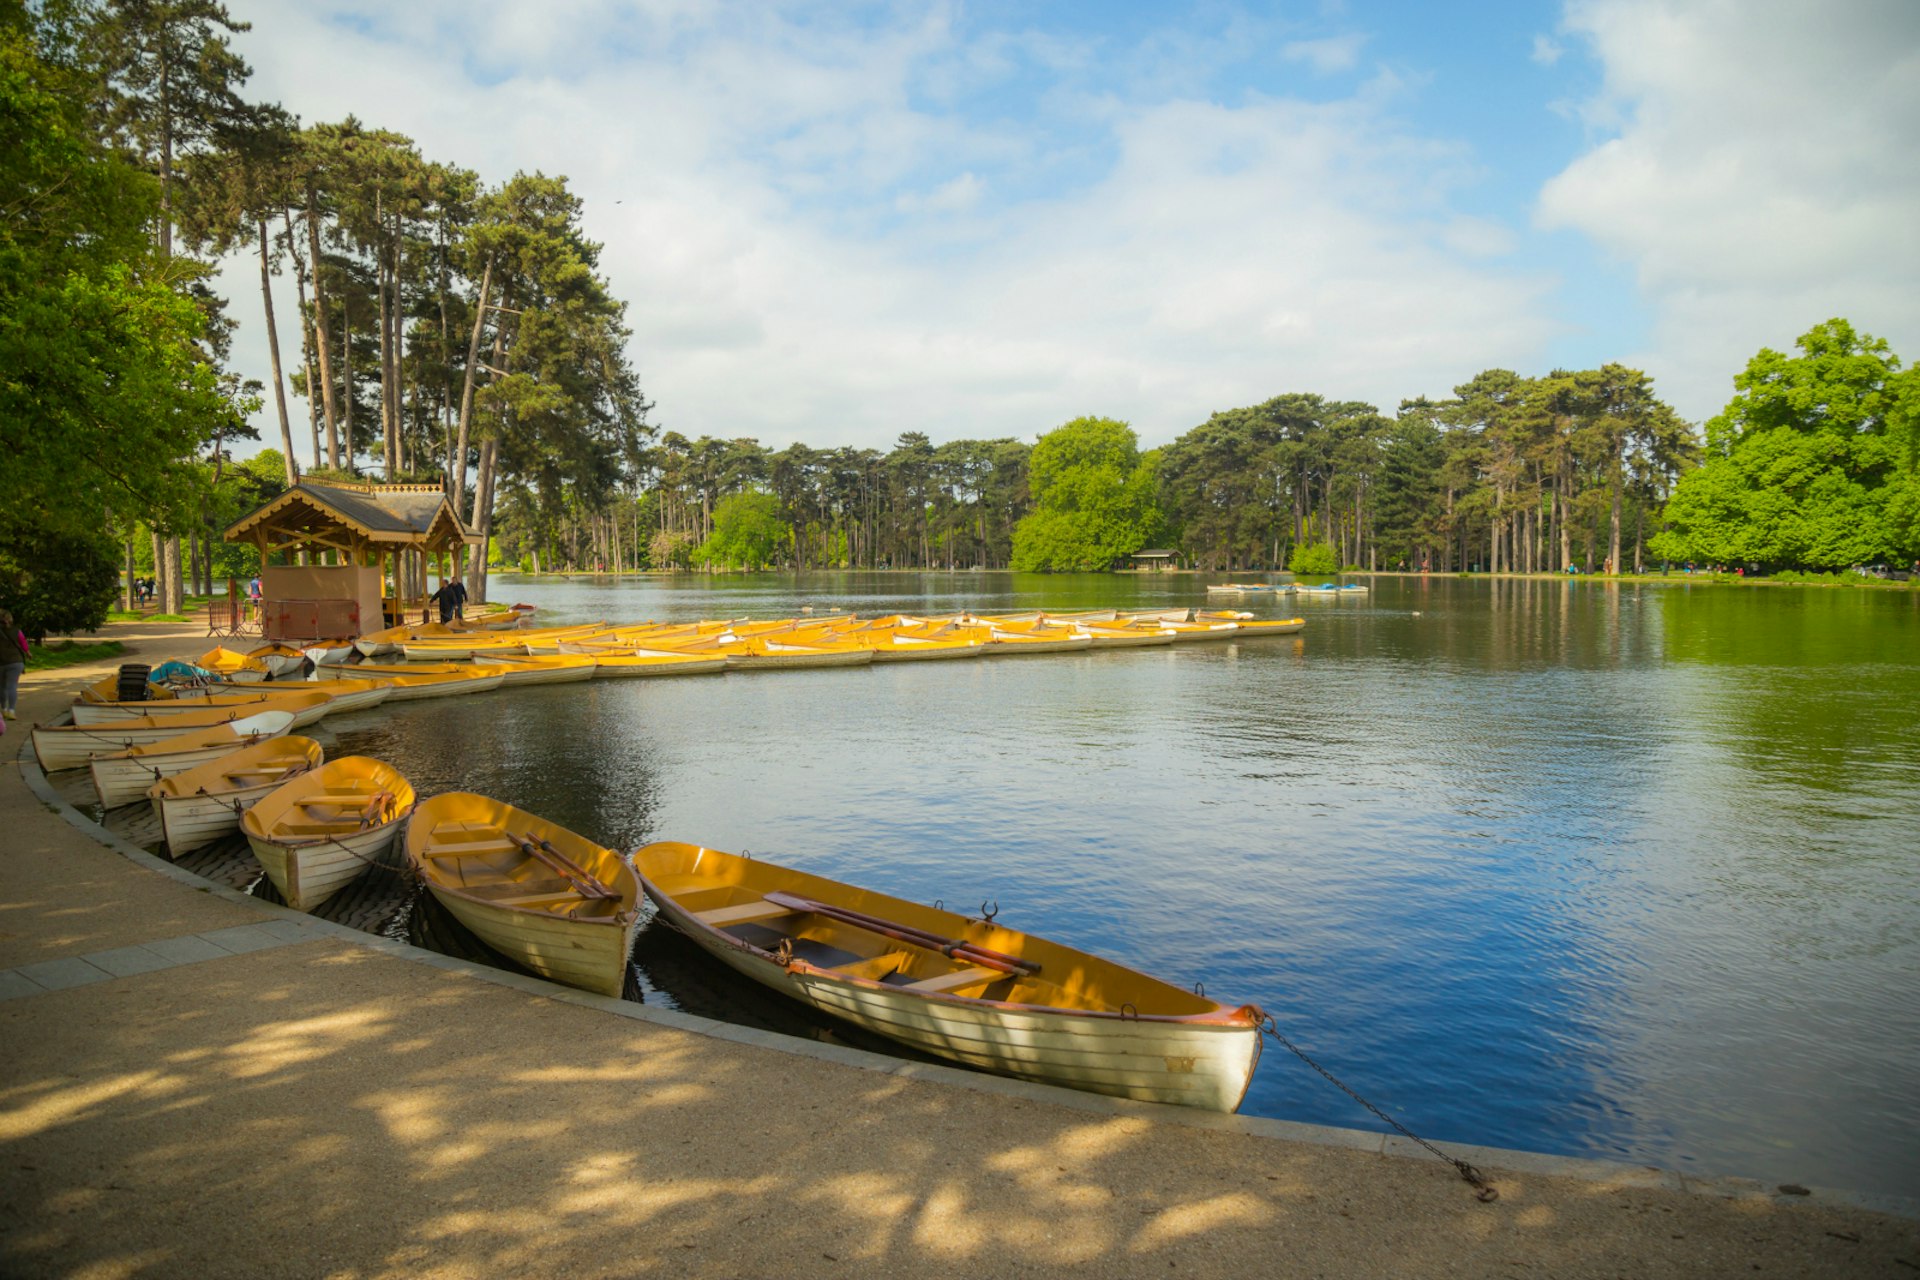 A number of yellow and white boats are moored on the banks of Lac Inférieur in Bois de Boulogne, Paris. The lake is large and surrounded by greenery.